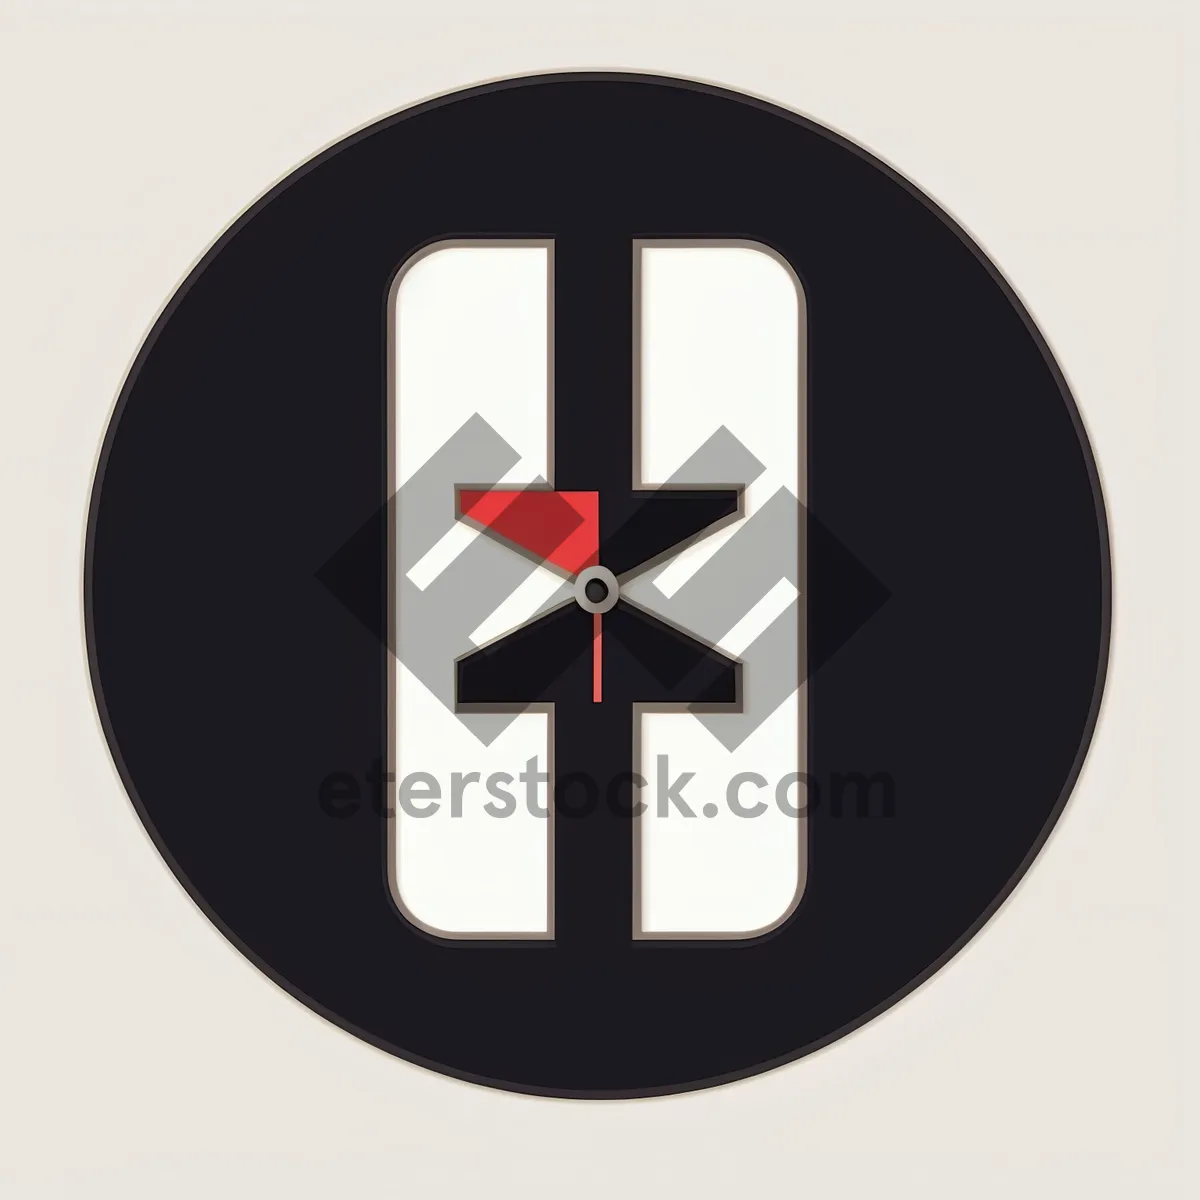 Picture of Glossy Black Round Web Button Icon